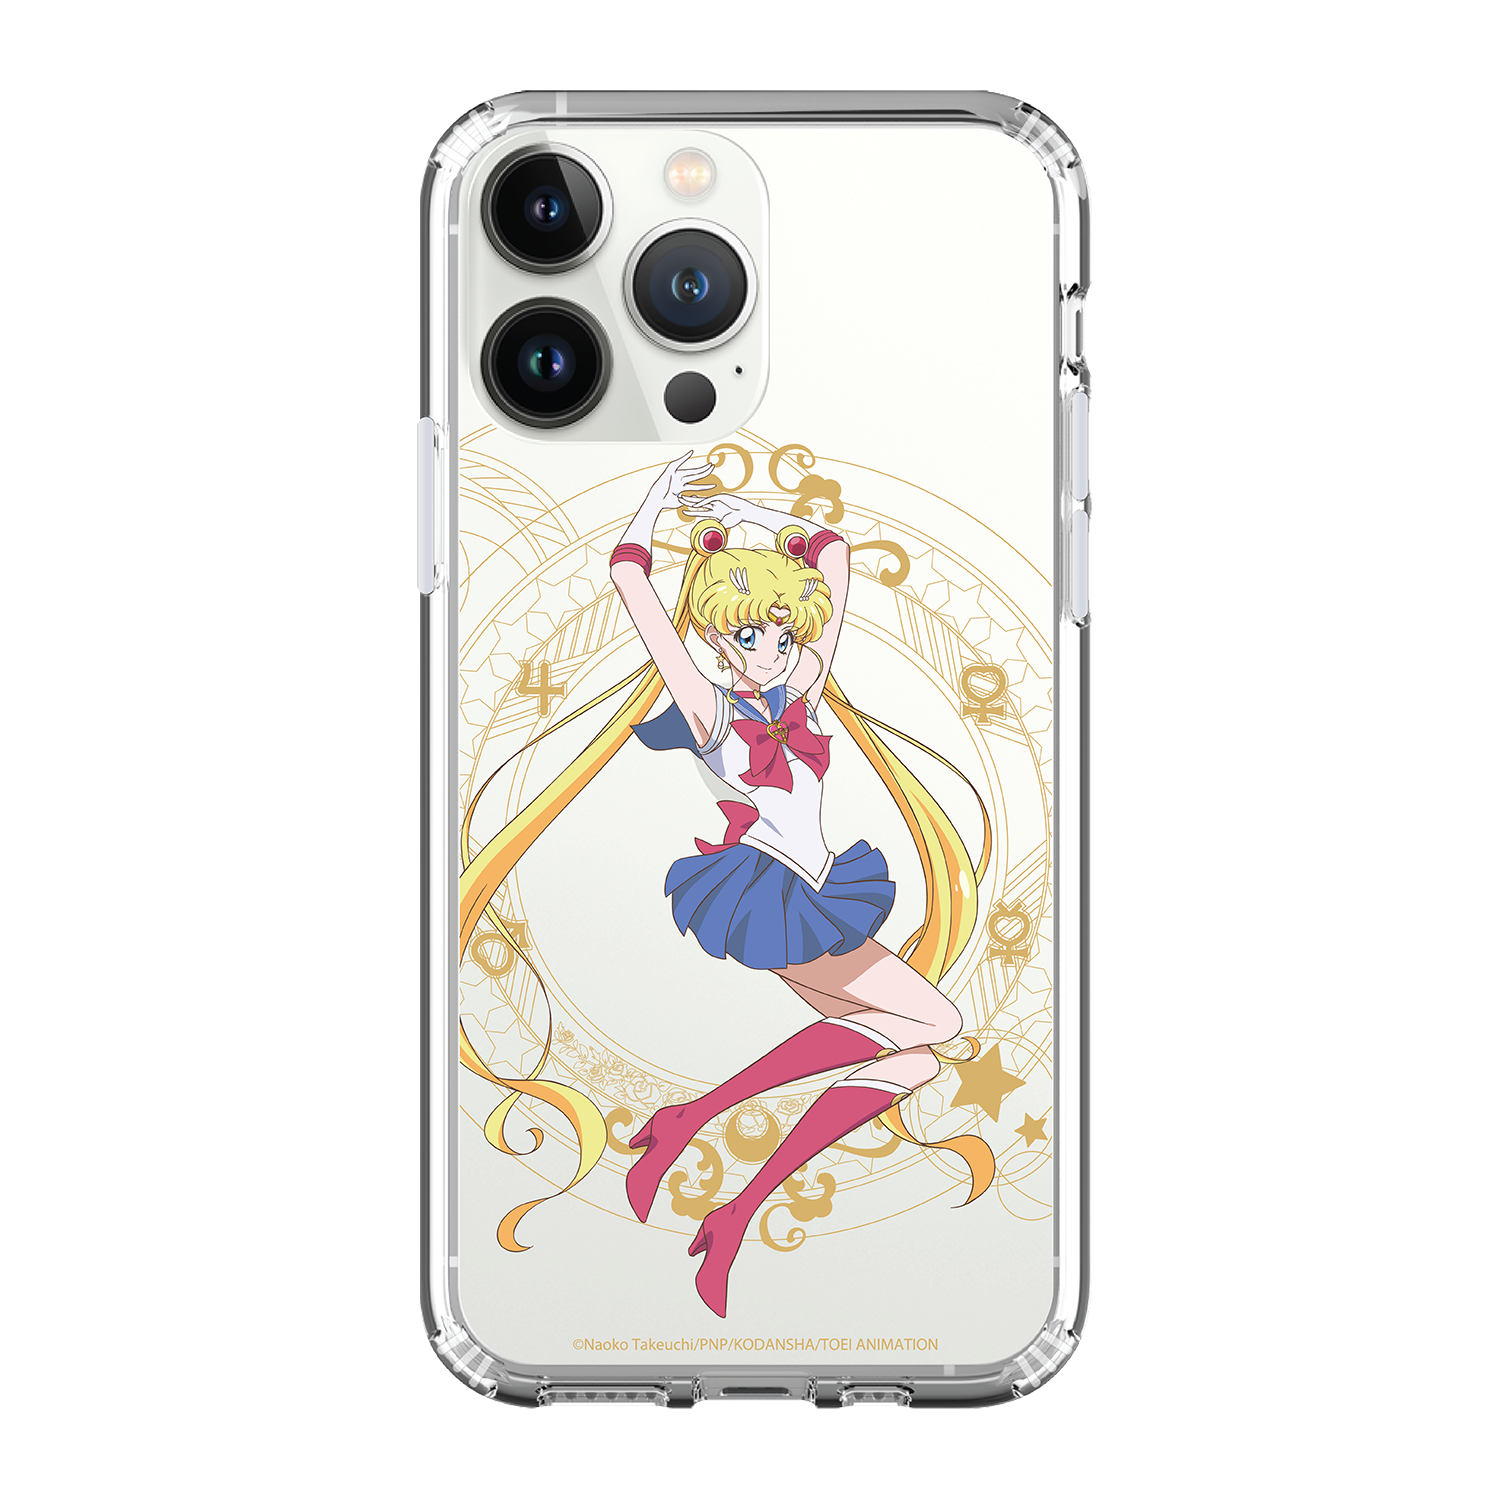 Sailor Moon Clear Case / iPhone Case / Android Case / Samsung Case 美少女戰士 正版授權 全包邊氣囊防撞手機殼 (SA98)